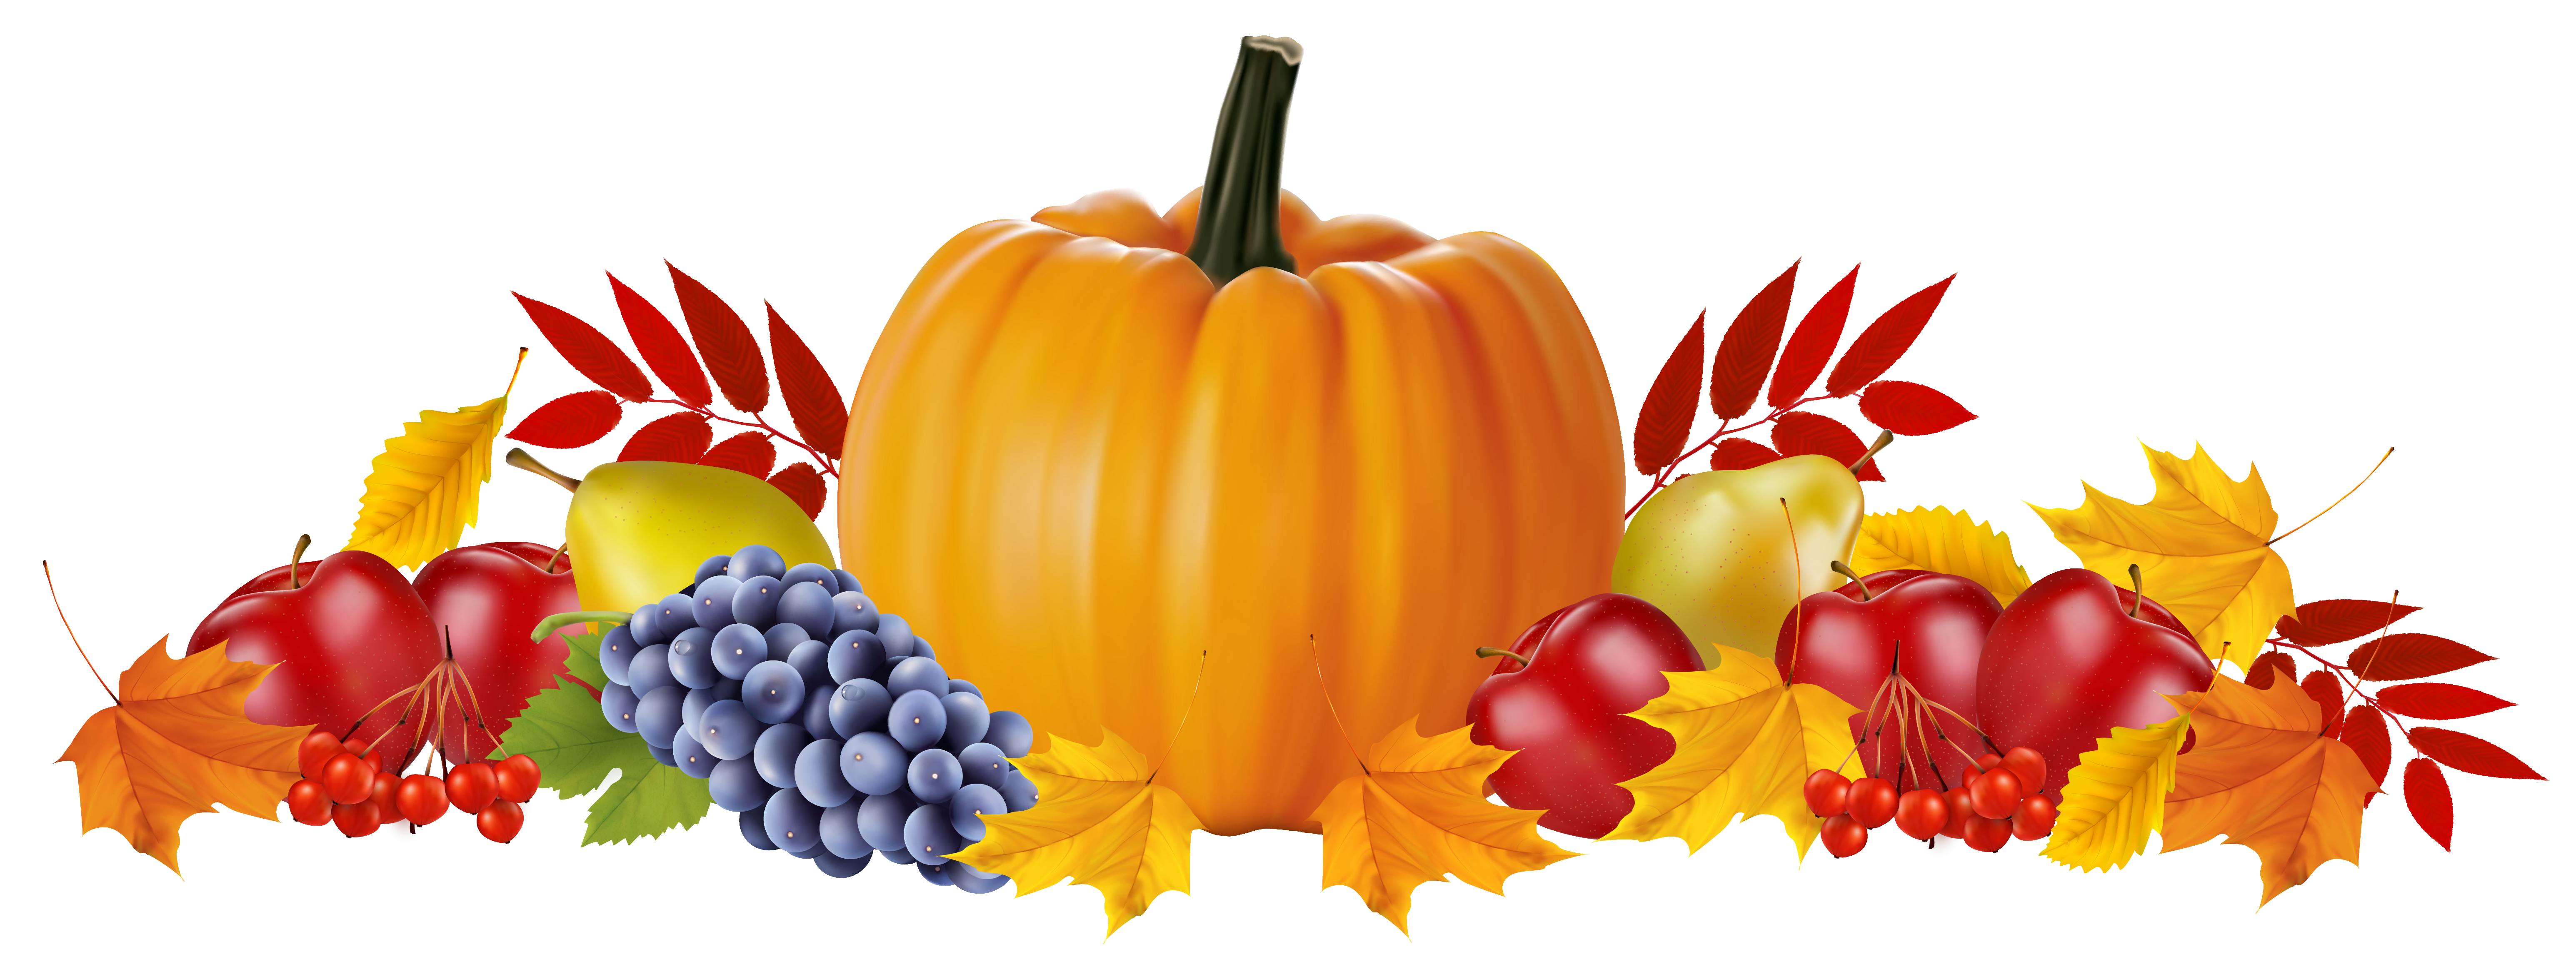 Autumn Fruits and Leaves PNG Clipart Image 